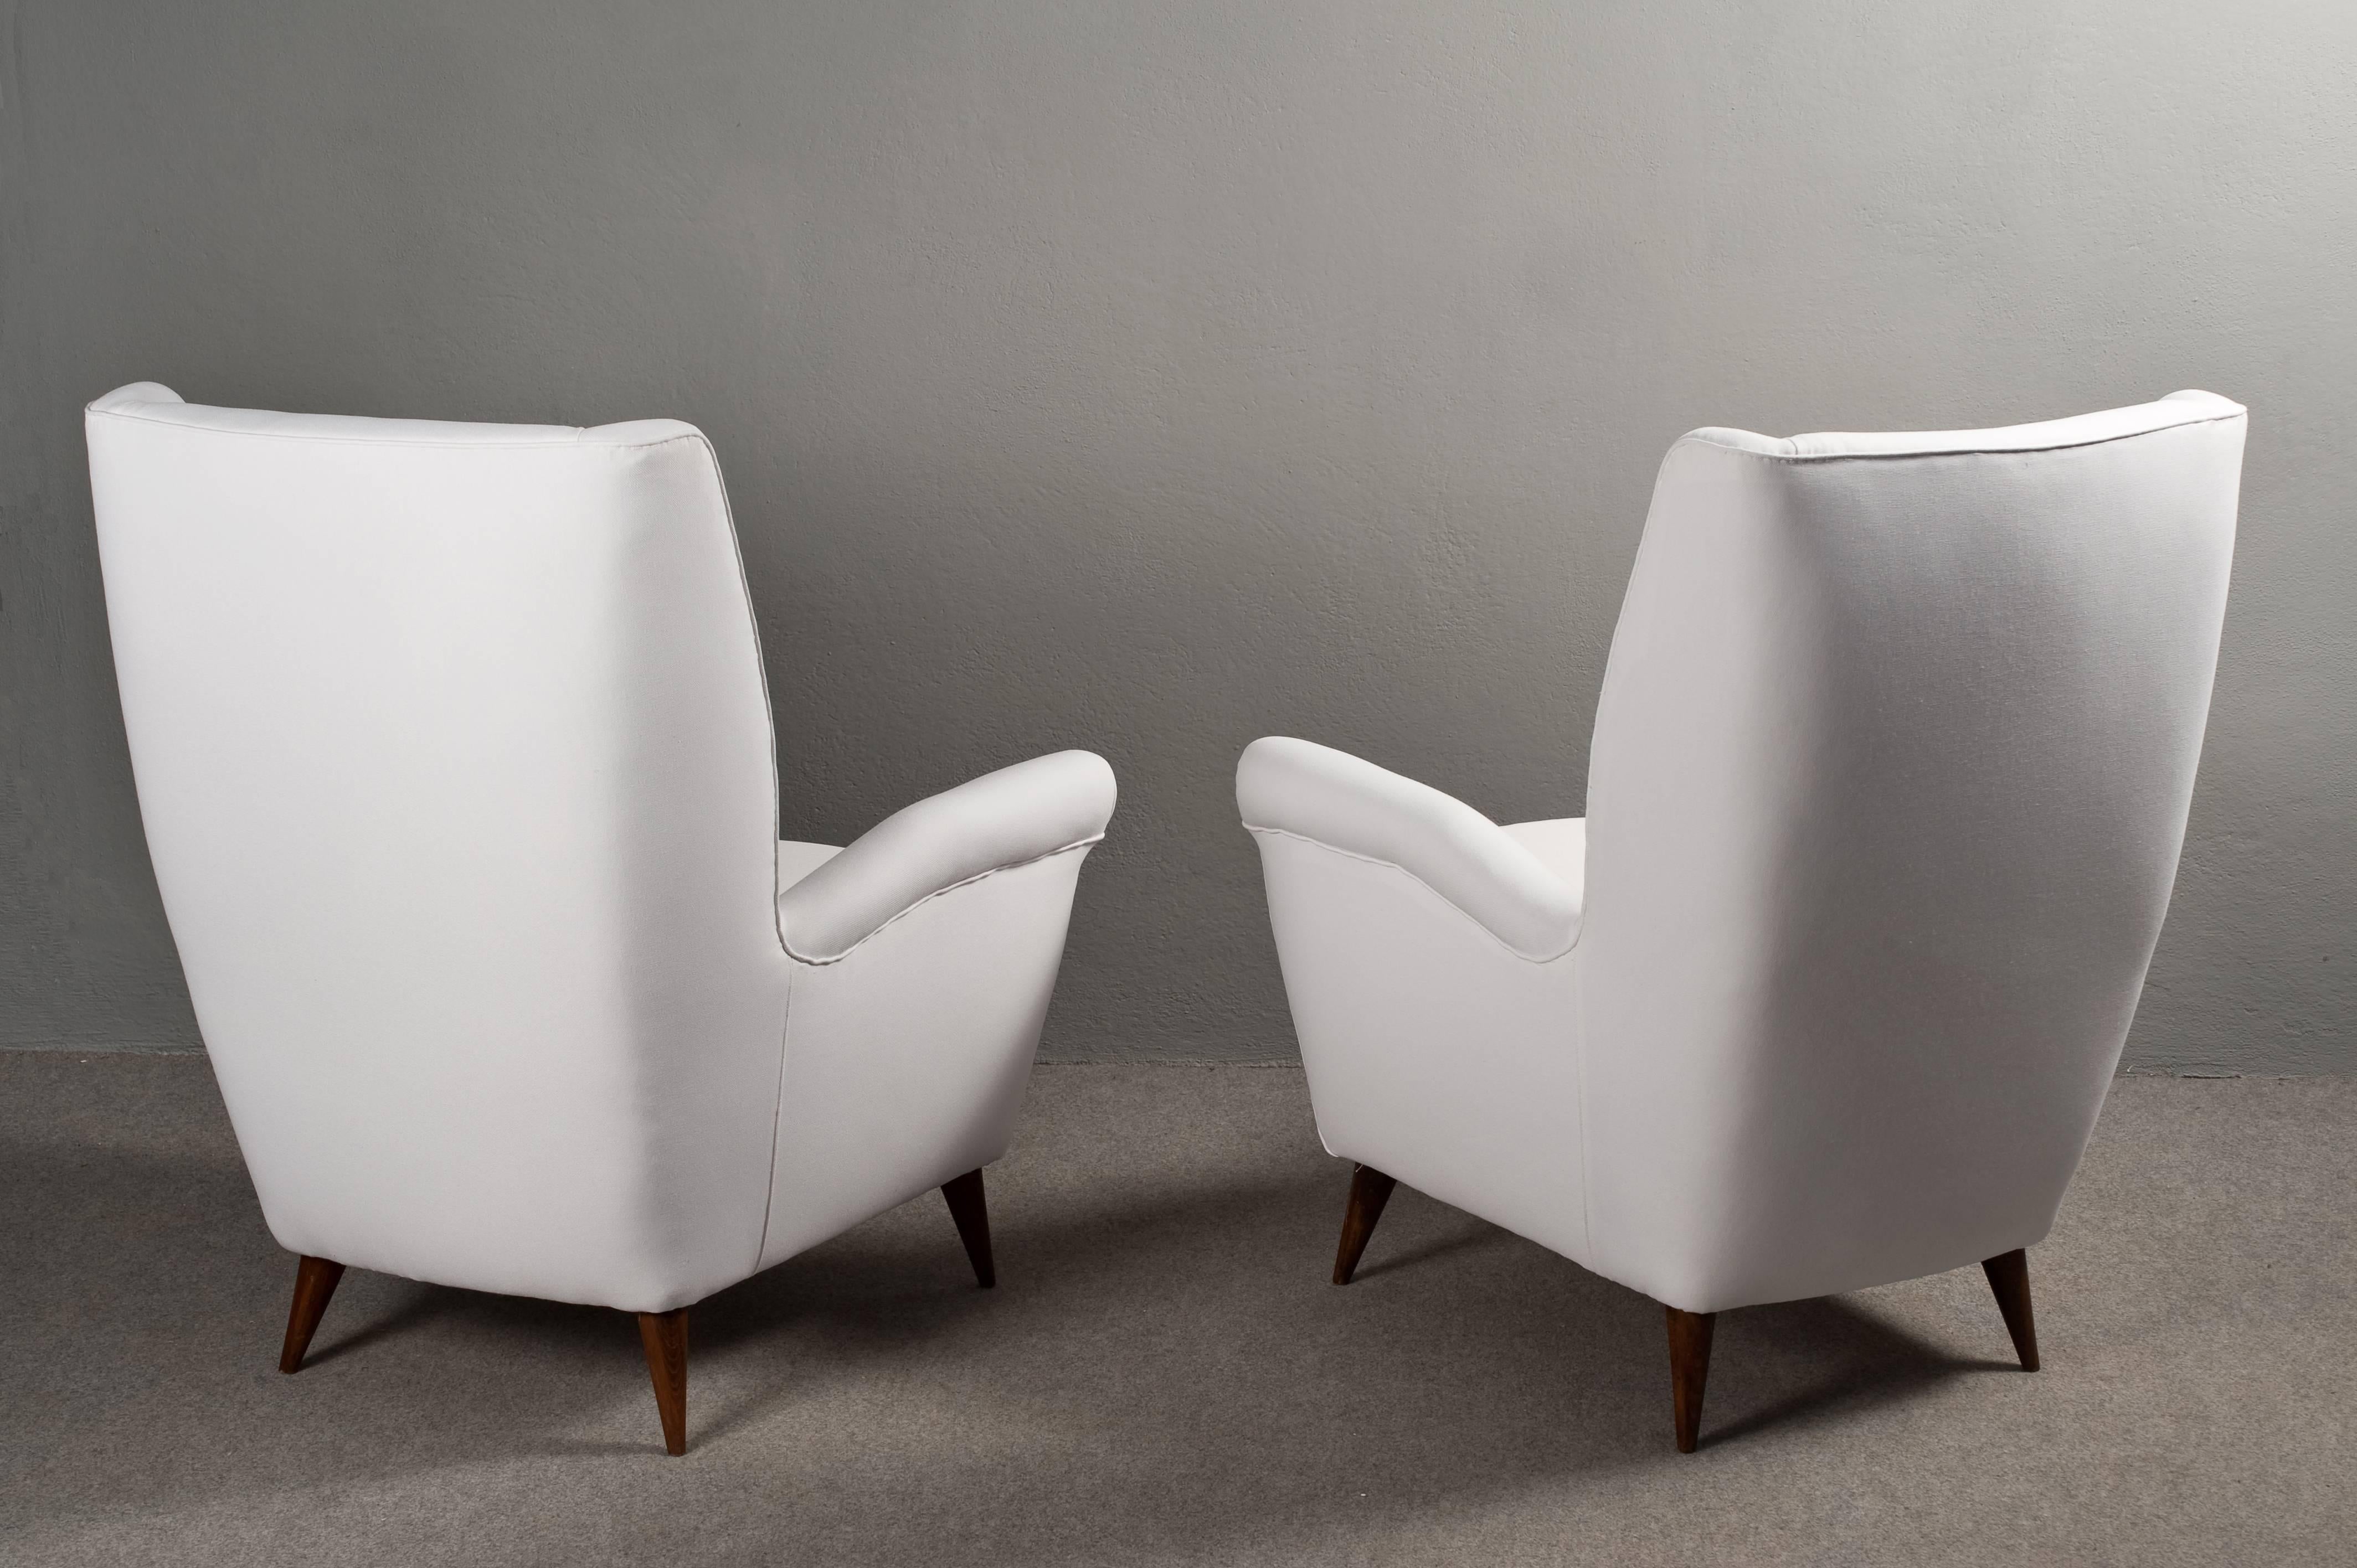 Stunning pair of armchairs designed by Gio Ponti for ISA Bergamo.
Sculptural armchairs, reupholstered with white cotton.
Expertise by Gio Ponti Archives.